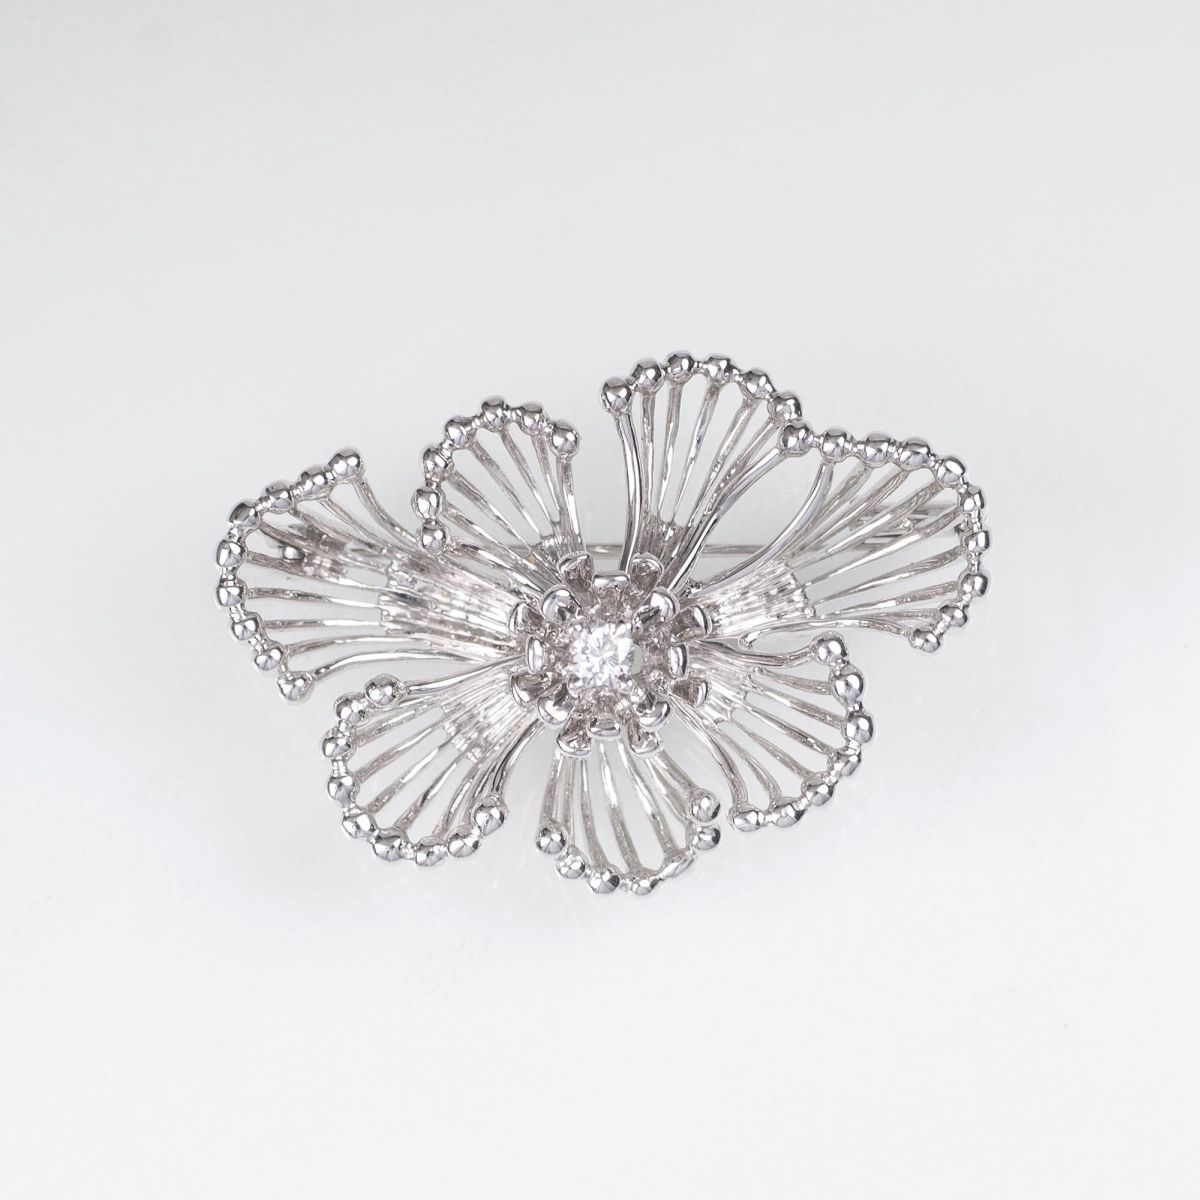 A White Gold Brooch with Diamond